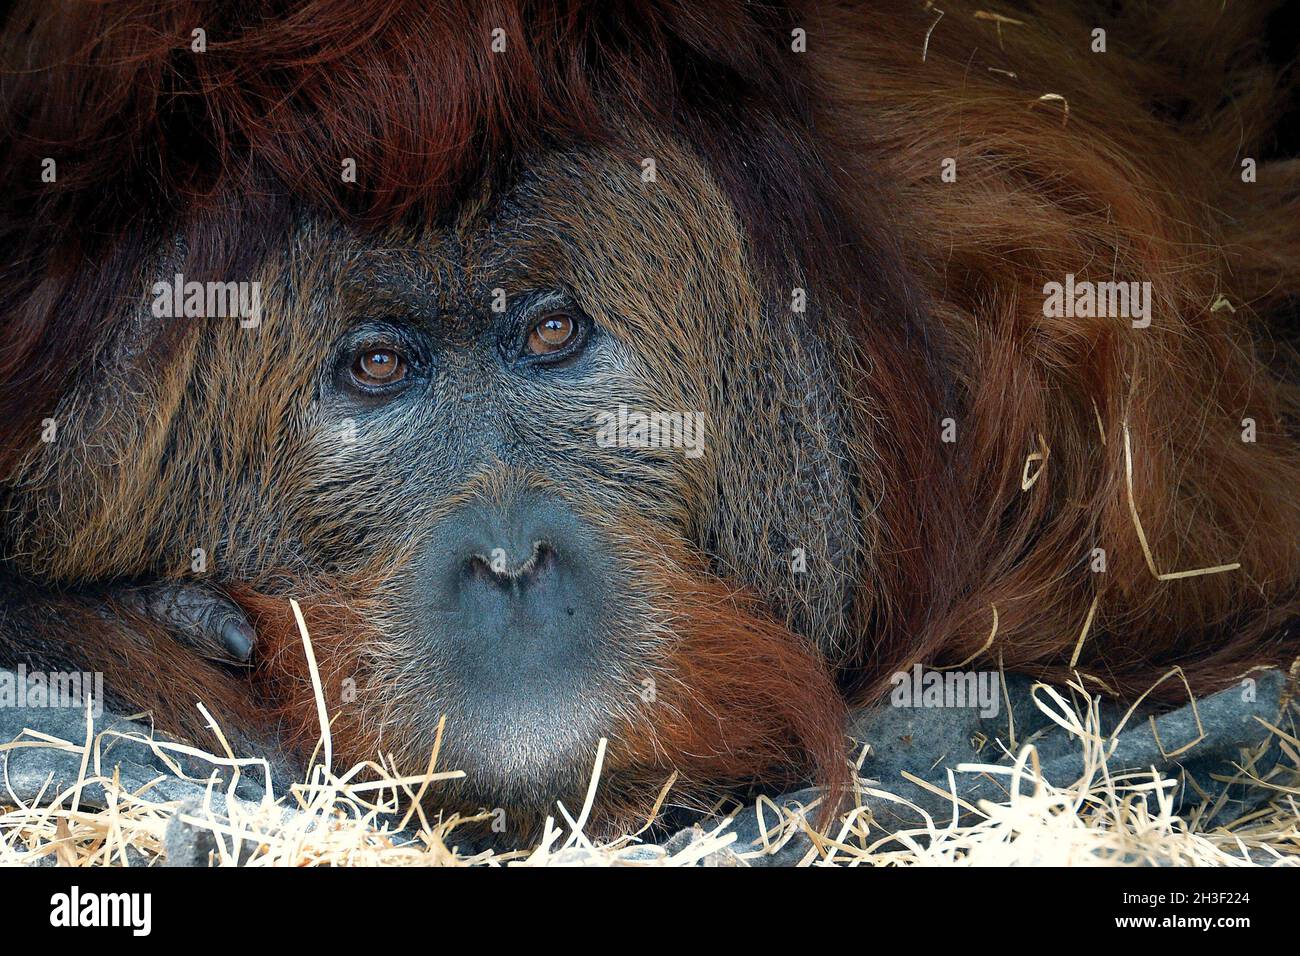 October 28, 2021, Usti nad Labem, Czech Republic: A 52-year-old male orangutan called Ferda at Usti nad Labem Zoo in the Czech Republic. Orang-utan Ferda born on 5 October 1969 at Frankfurt am Main in Germany. Orang-utan is hybrid Bornean and Sumatran Orang-utan. He lives alone and watching life around. The orangutans, solitary in the wild, live in small groups or pairs at the Zoo. Orangutans are managed by the Association of Zoos Species Survival Plan, which seeks to maintain a genetically diverse, and healthy populations of both Bornean and Sumatran species of orangutans. (Credit Image: © Stock Photo